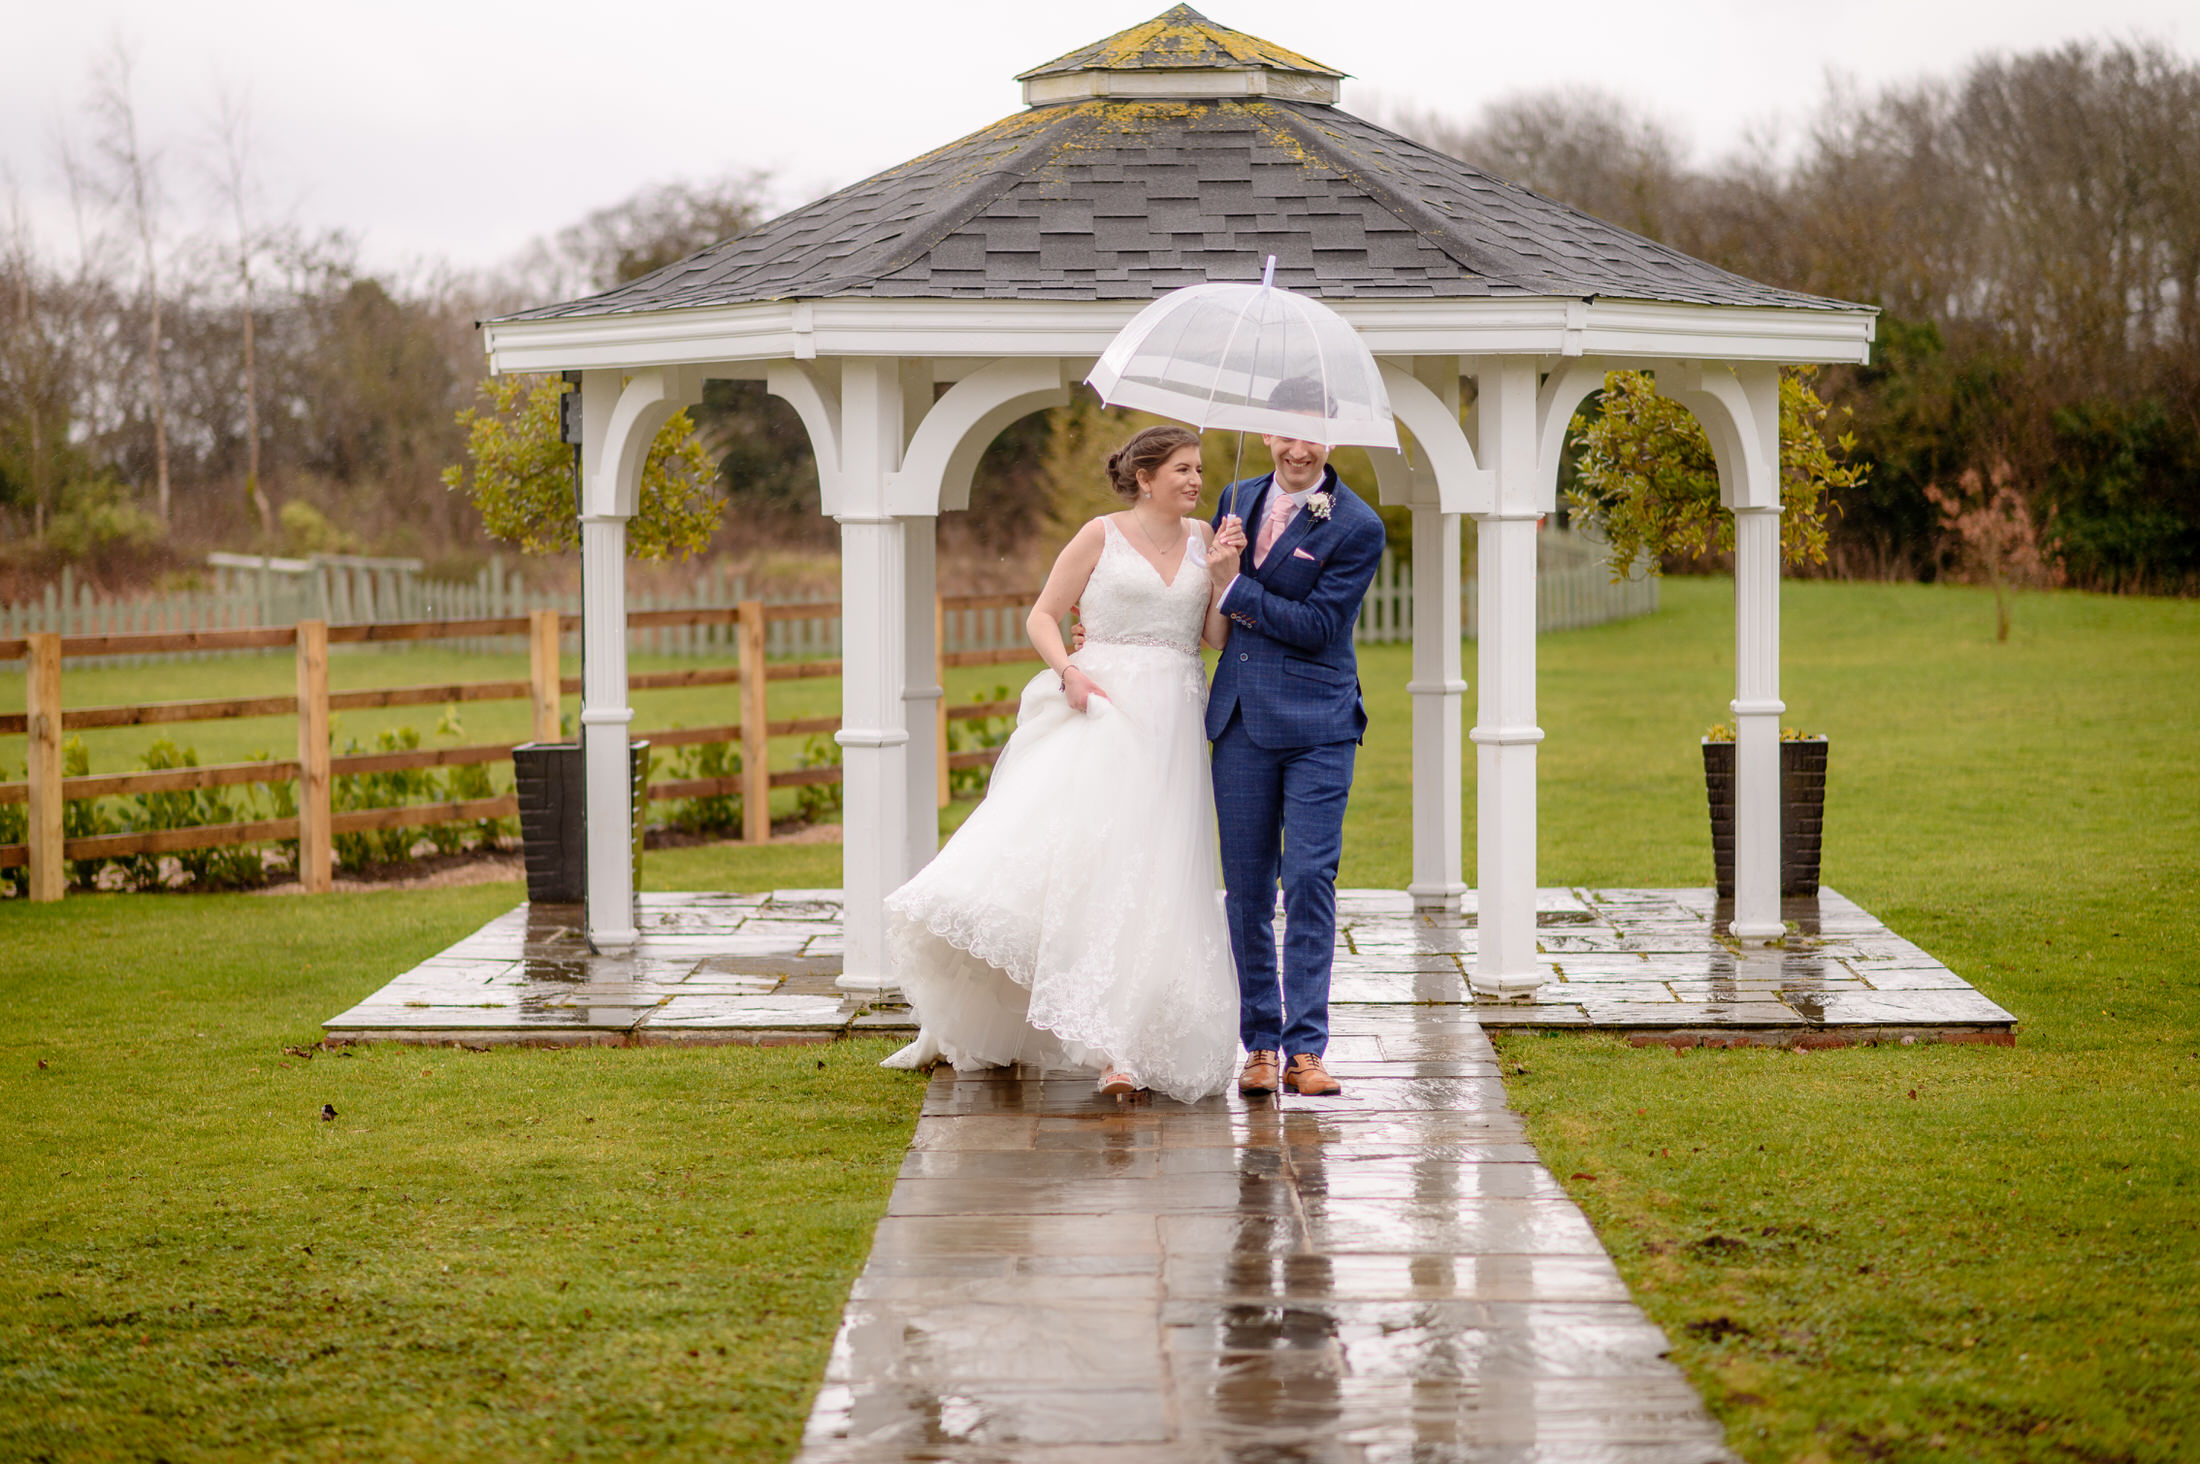 A memorable wedding at the Brackenborough Hotel, with the bride and groom holding an umbrella in the rain.